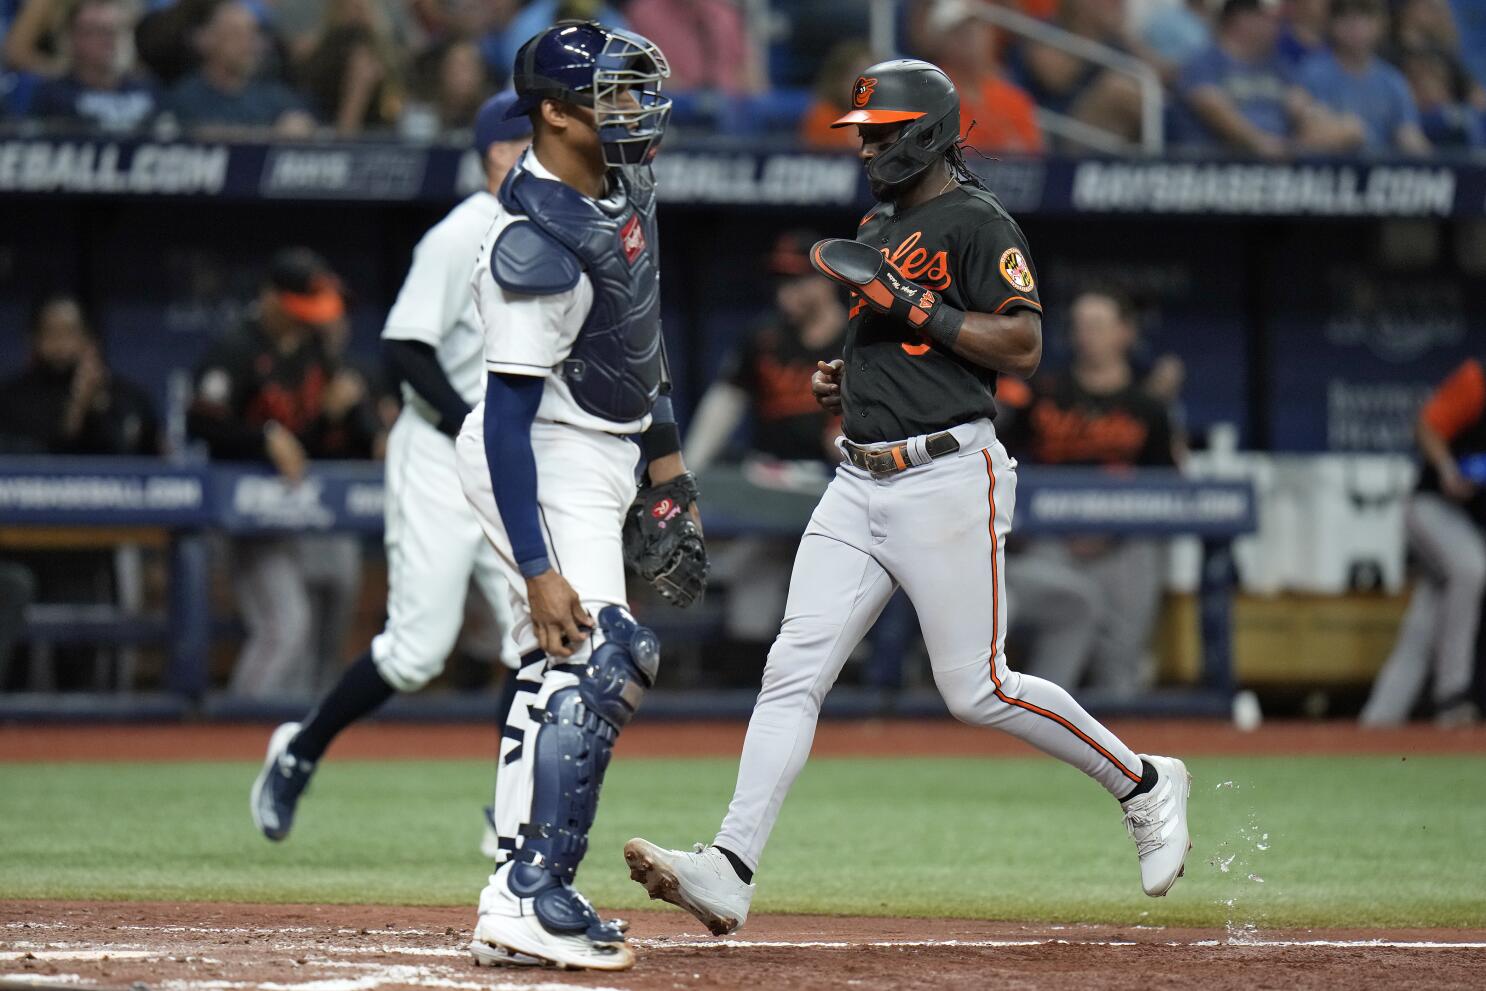 Mateo has 5 hits, Orioles pound Rays 10-3 for 8th win in 10 - The